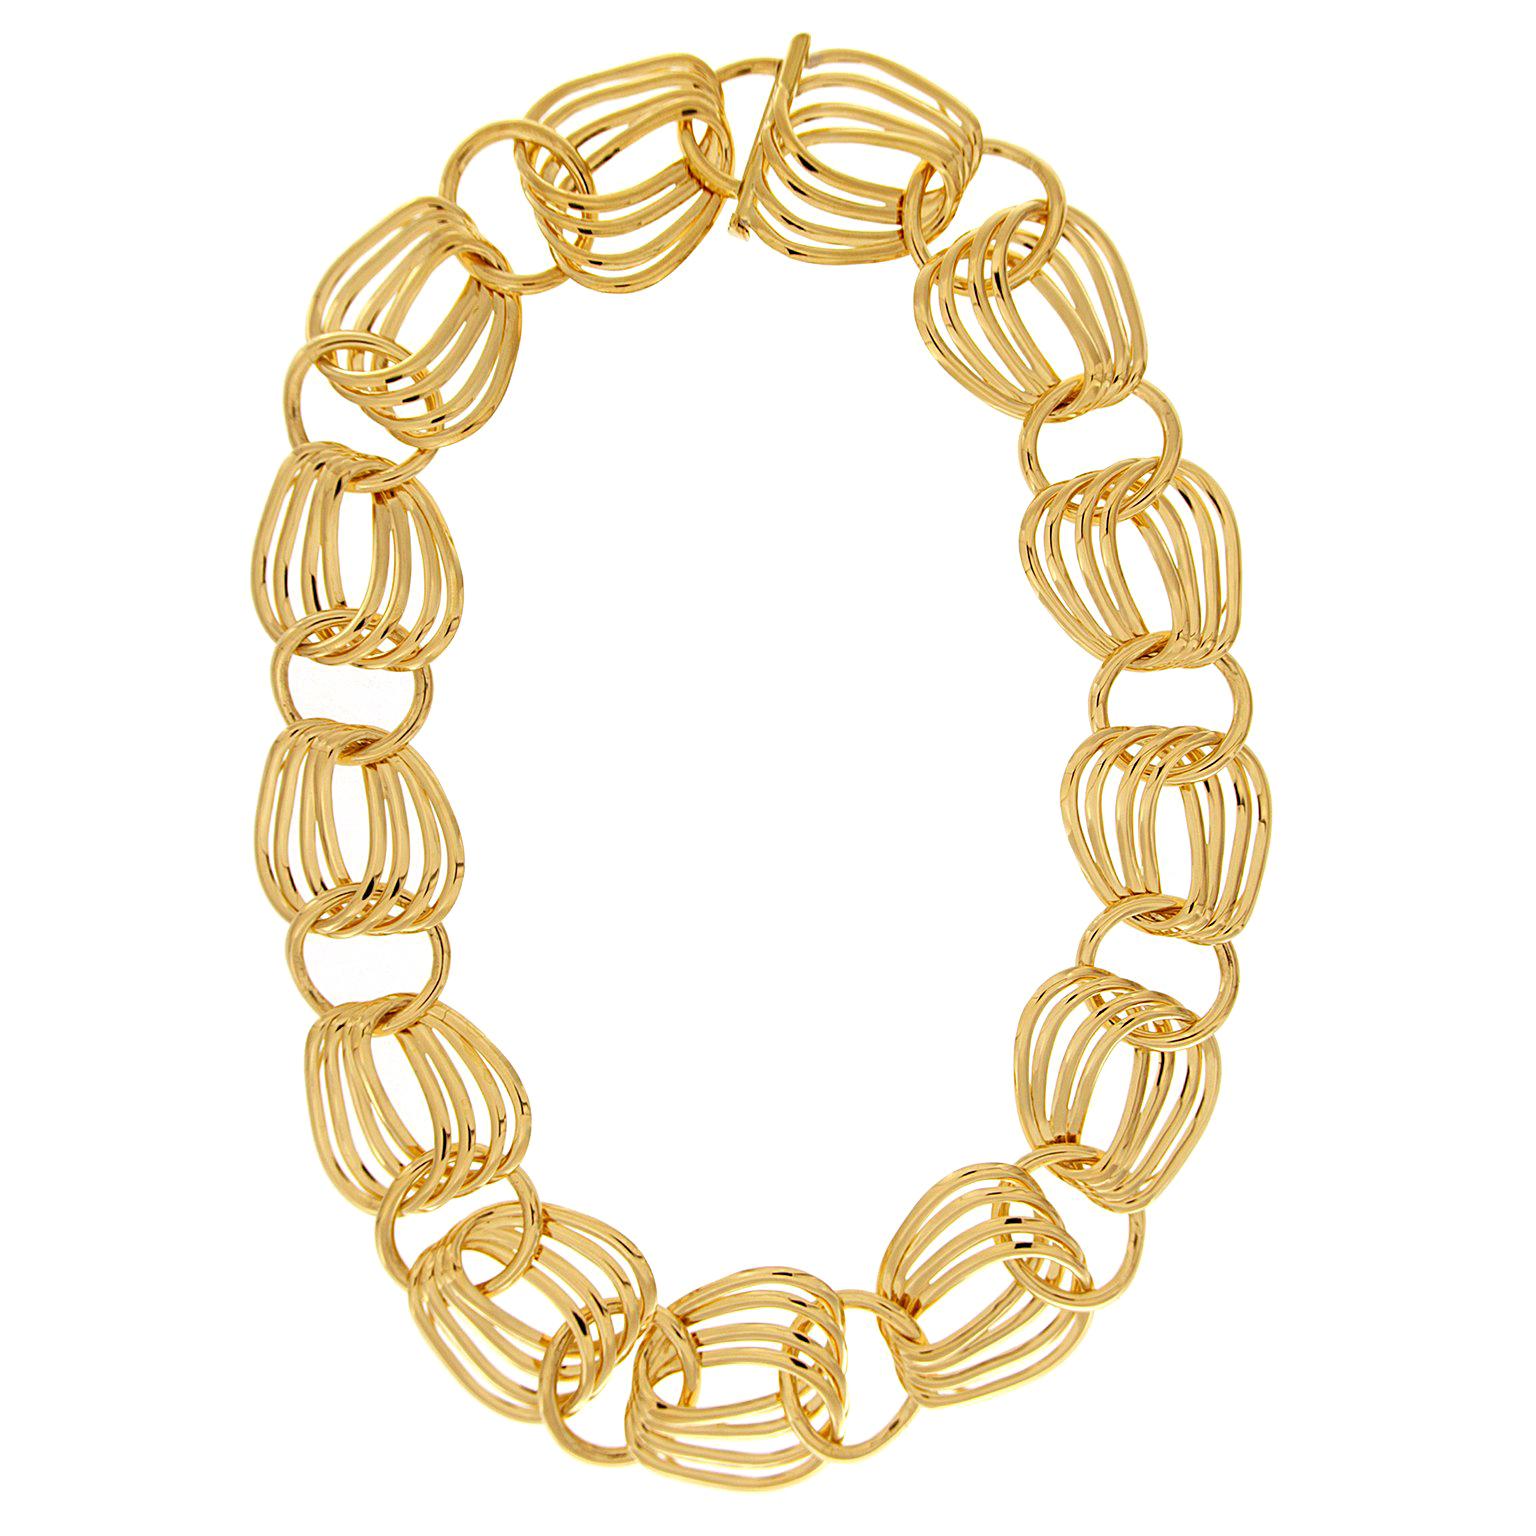 Valentin Magro Glamour Loose Link Gold Necklace